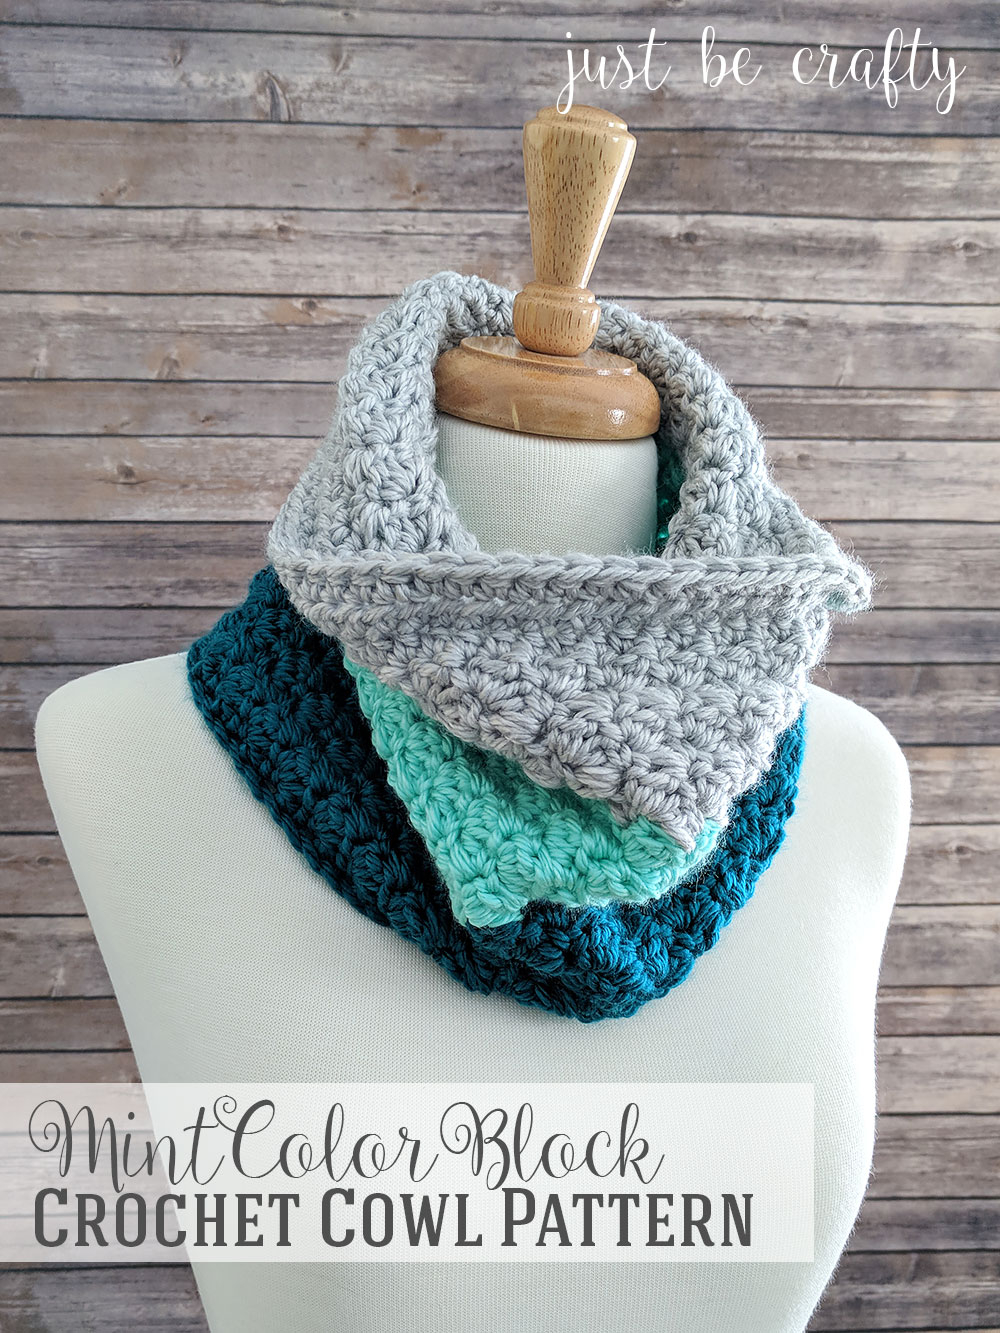 Free Crochet Cowl Patterns Mint Color Block Crochet Cowl Free Pattern Just Be Crafty